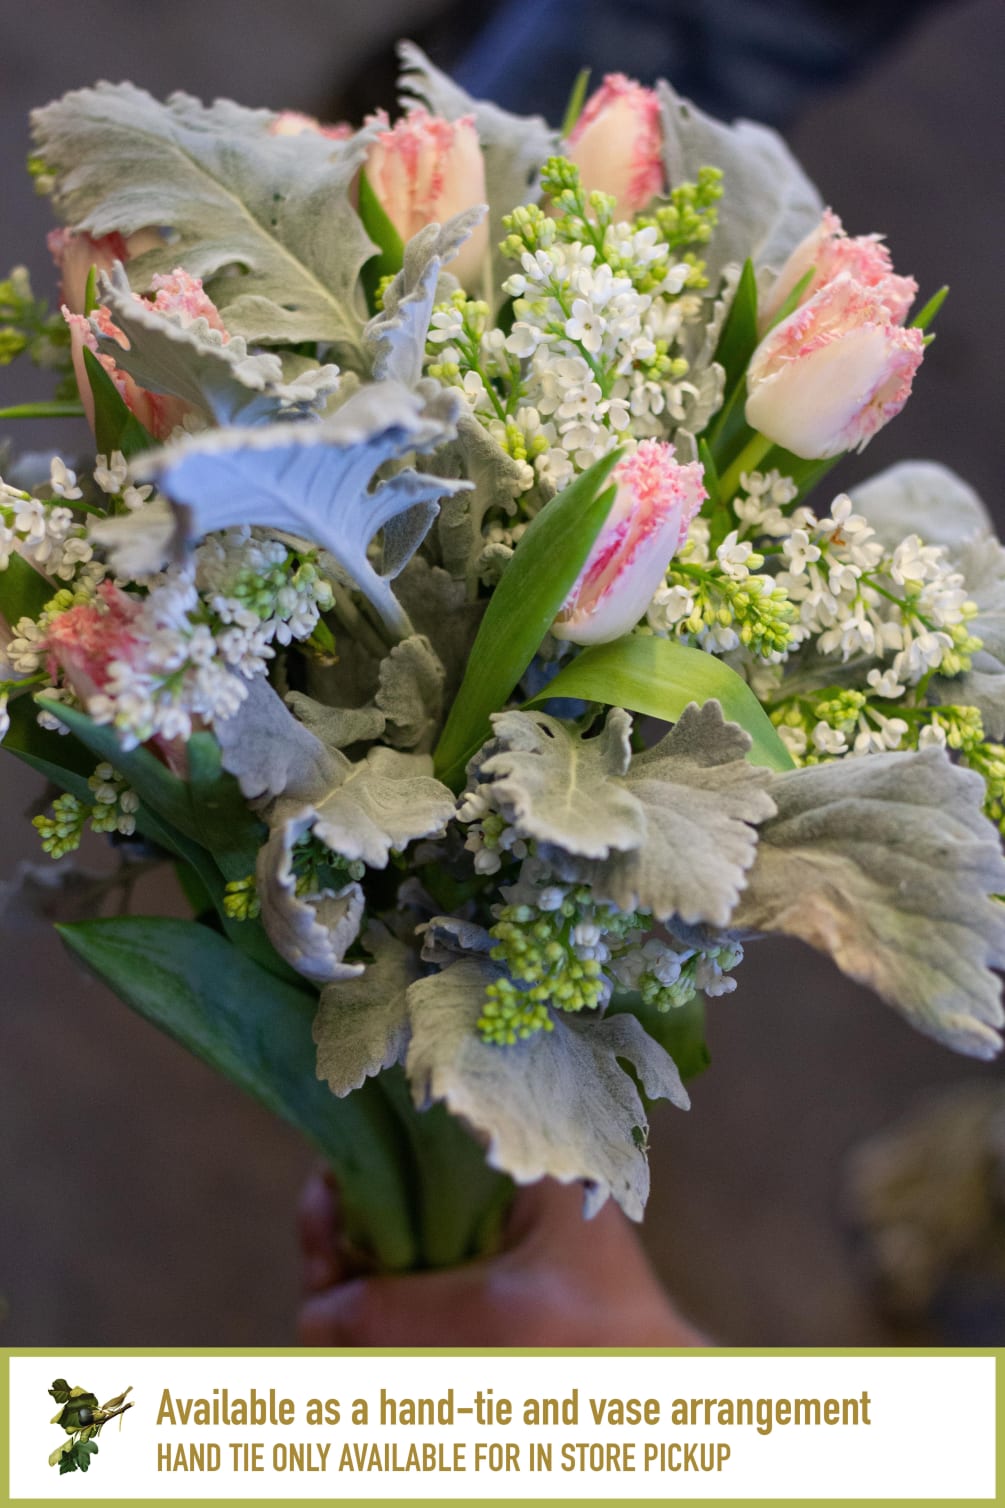 This arrangement is reminiscent of lush green fields during springtime after a